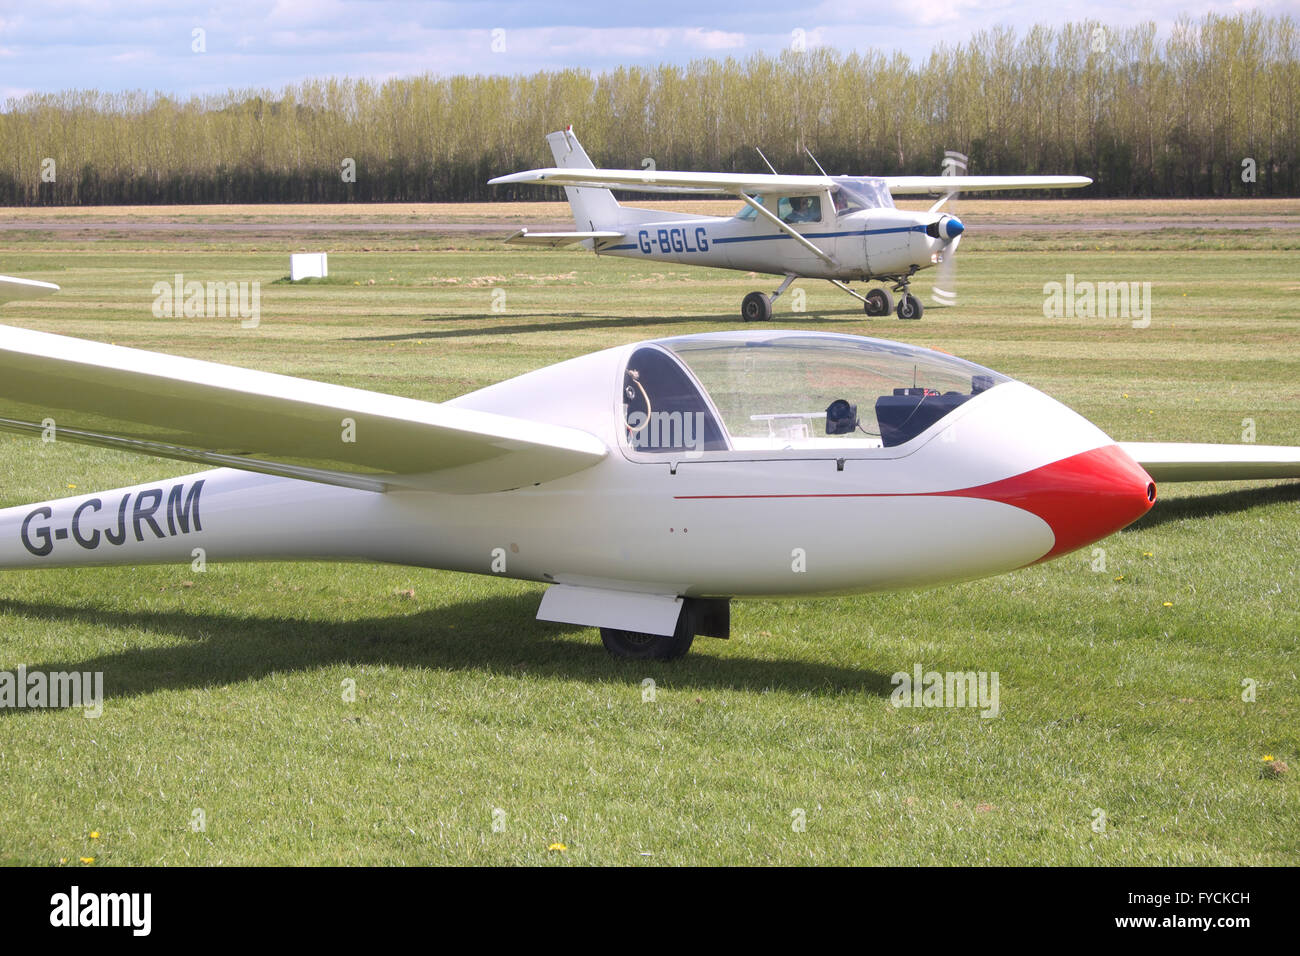 Glider and Cessna 152 basic trainer aircraft at Shobdon airfield in Herefordhire UK Stock Photo